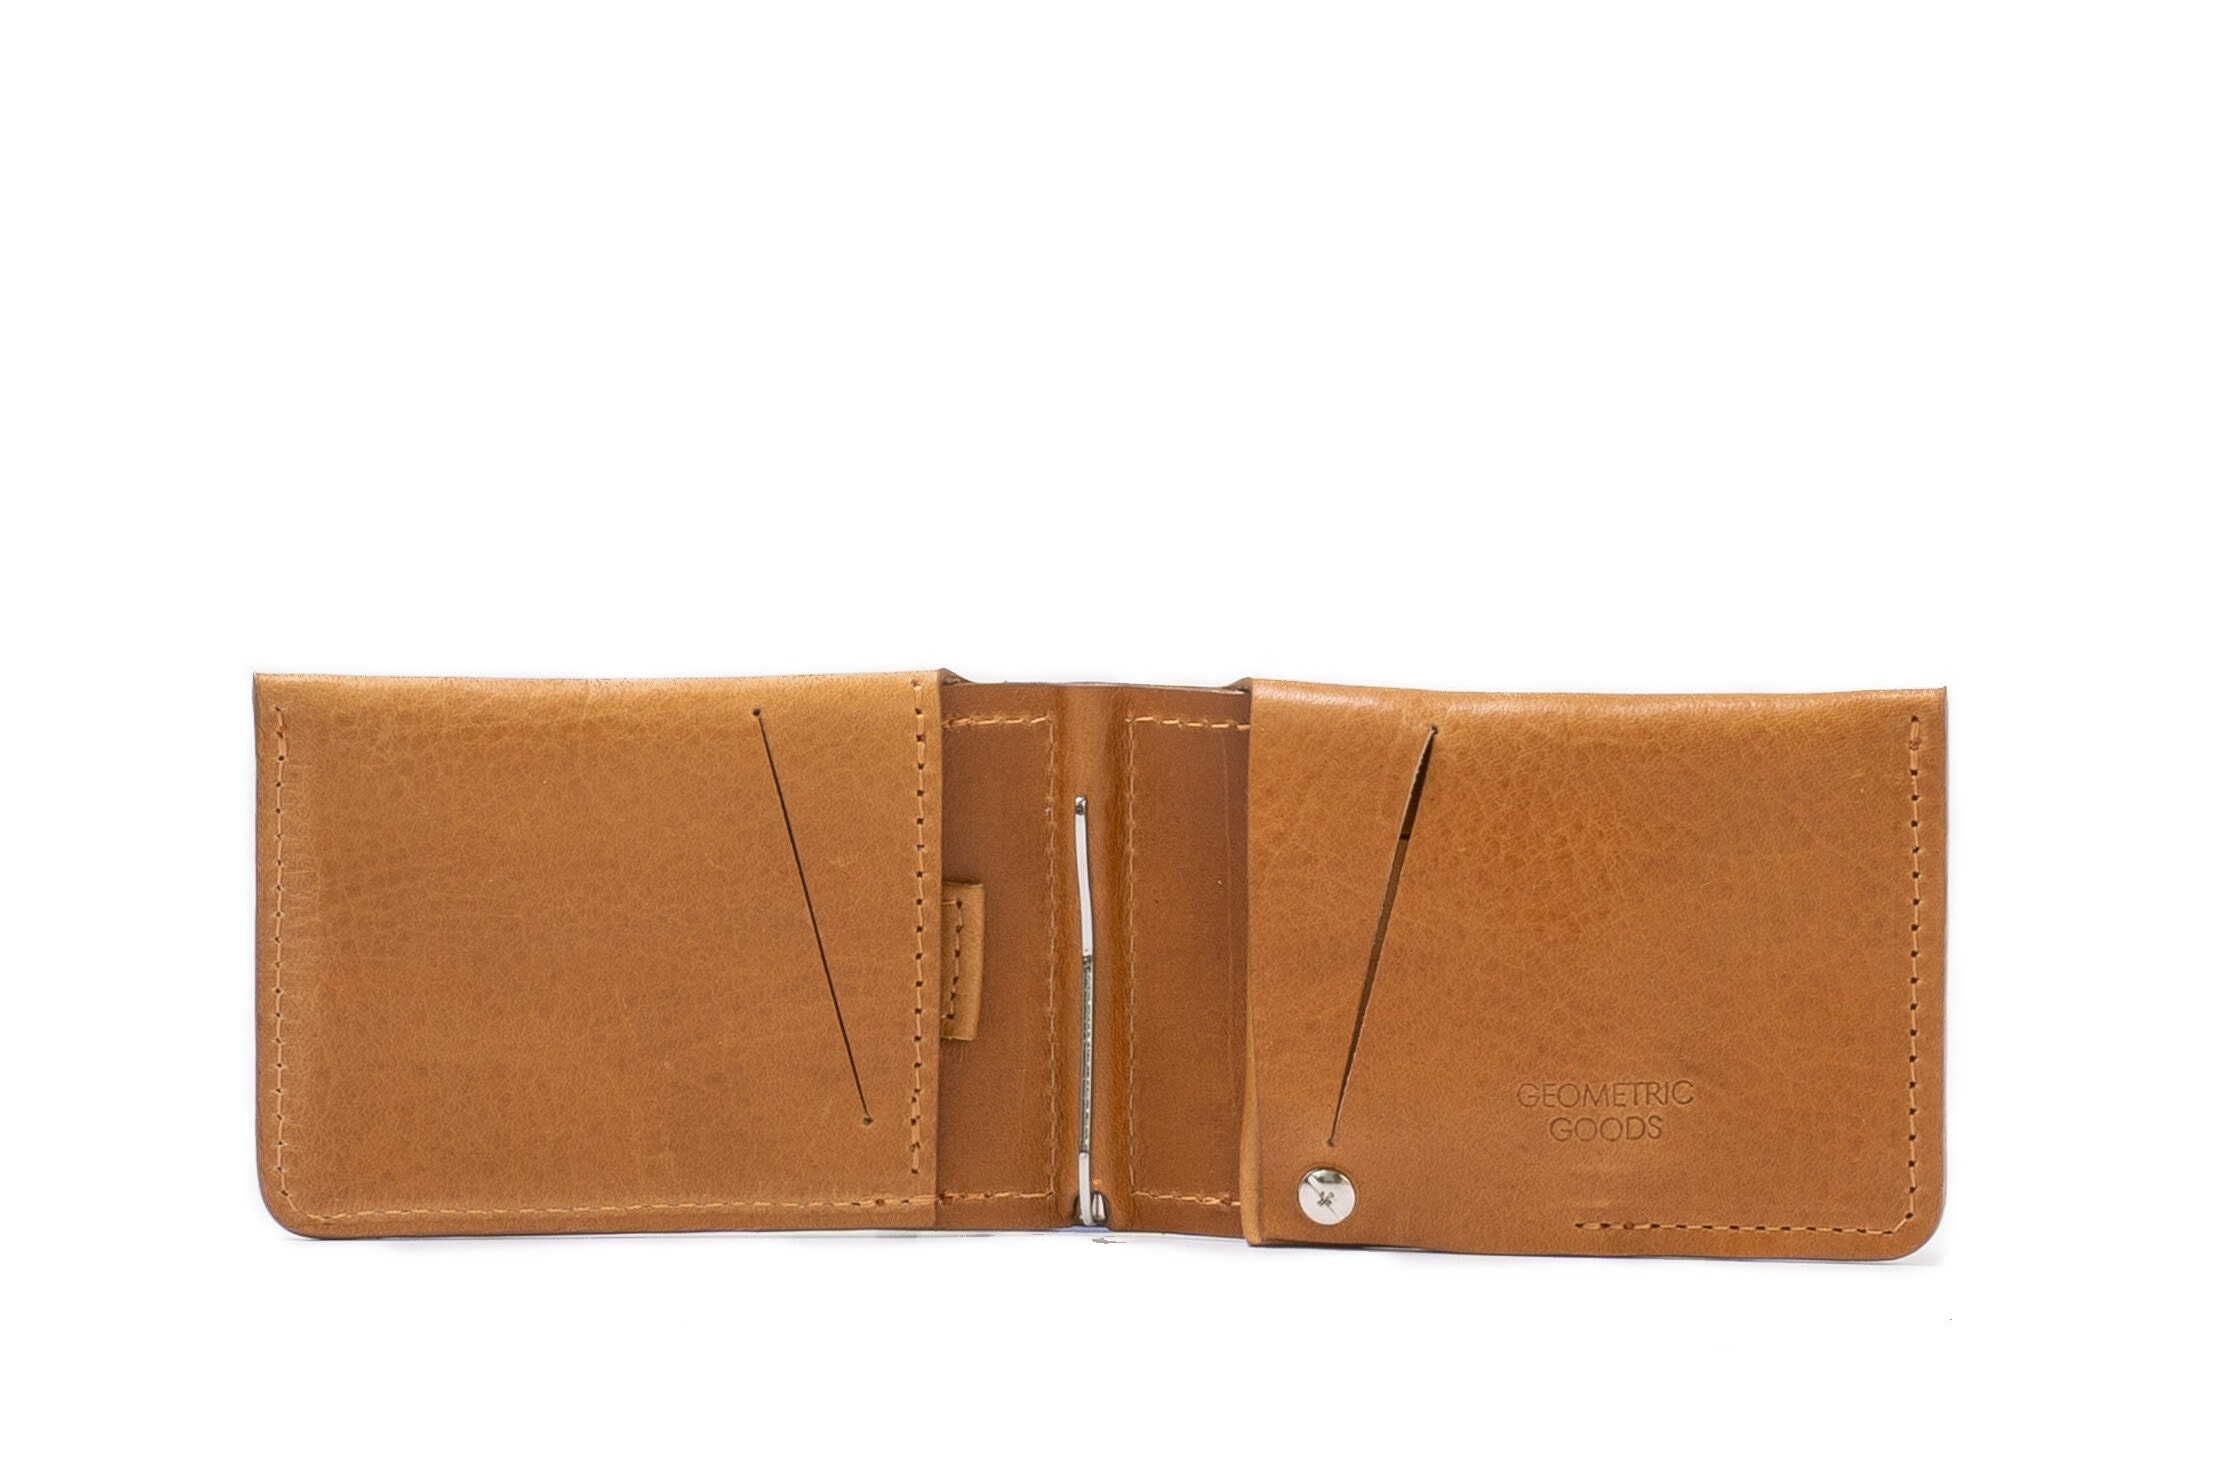 Leather AirTag Wallet With Money Clip and Hidden Pocket to Fit Inside  Apple's Airtag, Handcrafted From Full-grain Italian Leather 